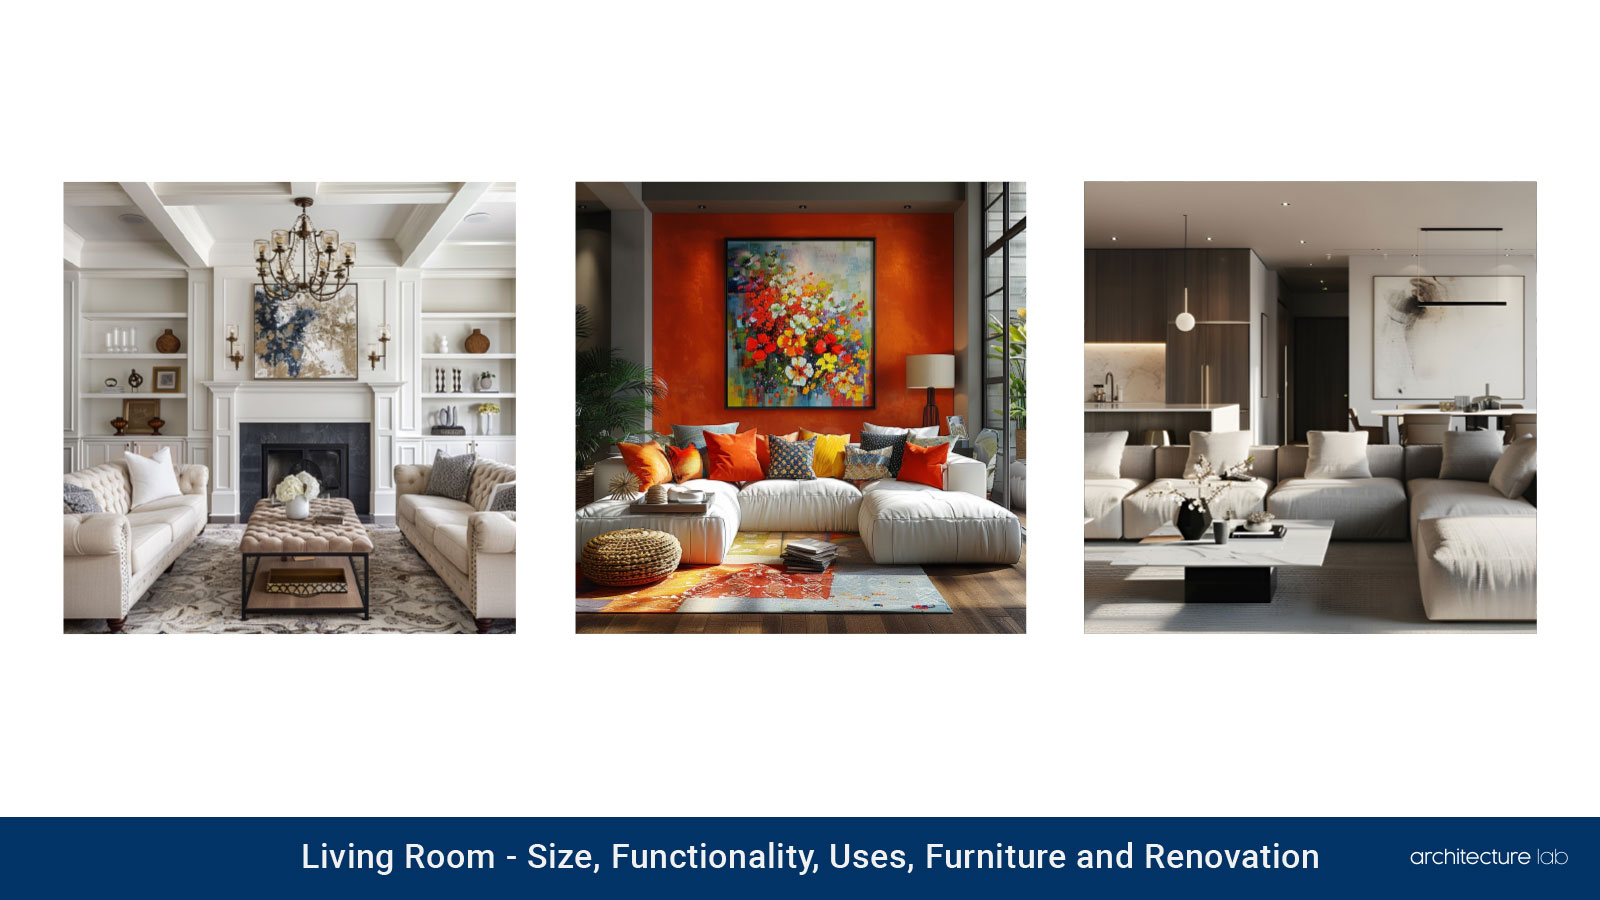 Living room: size, functionality, uses, furniture and renovation